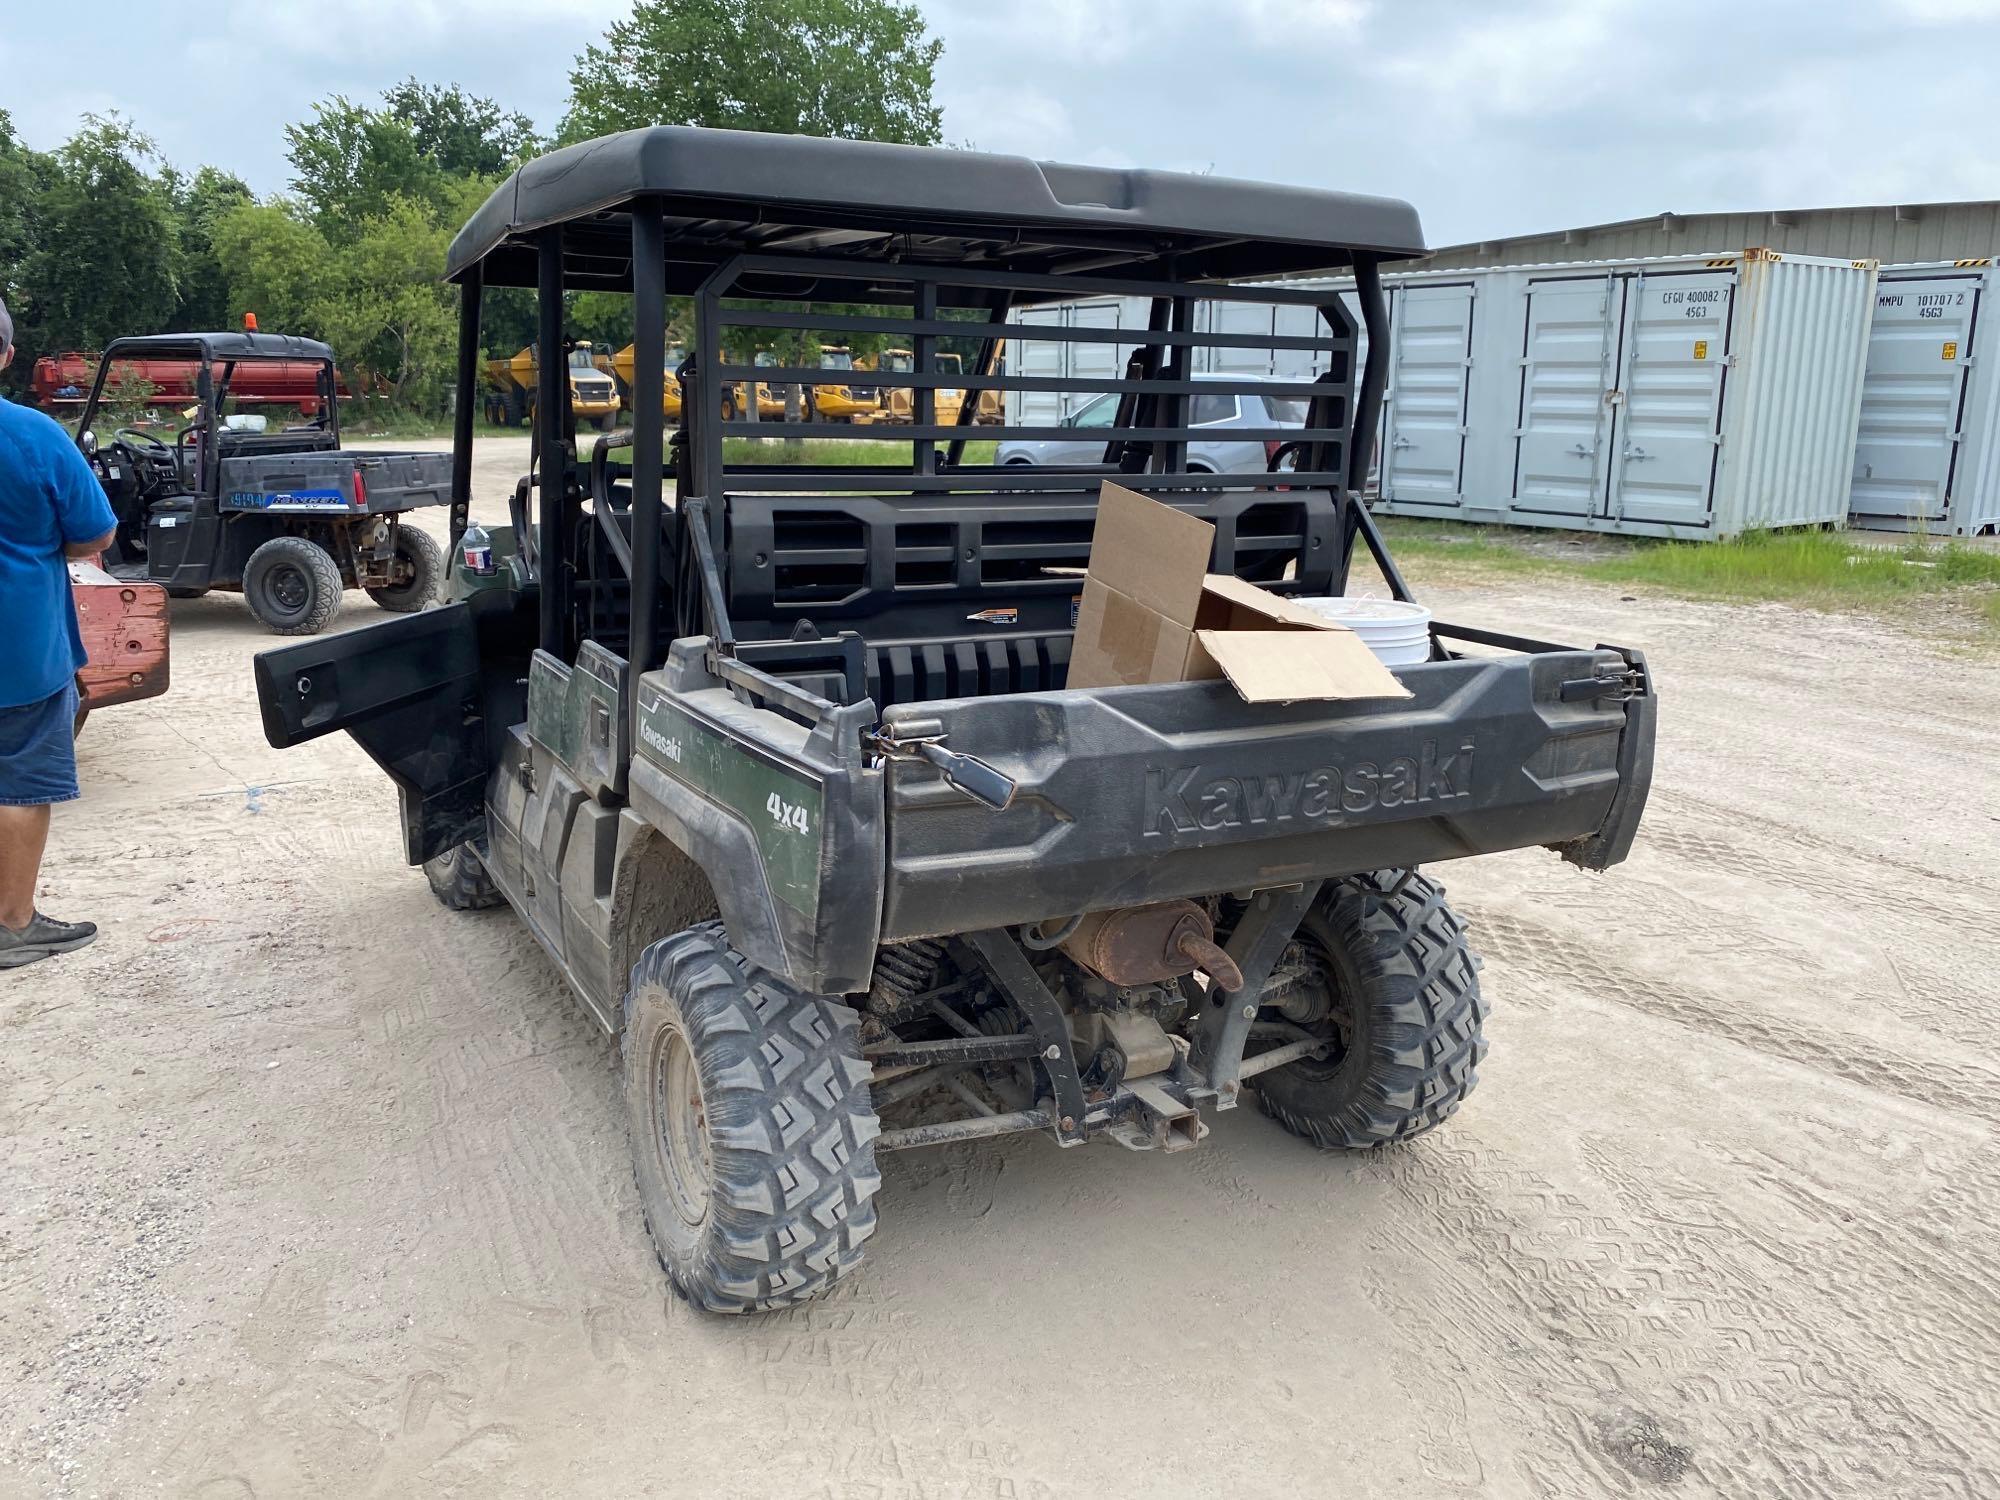 2019 KAWASAKI KAWF820BKF UTILITY VEHICLE SN:513886 4x4, powered by diesel engine, equipped with